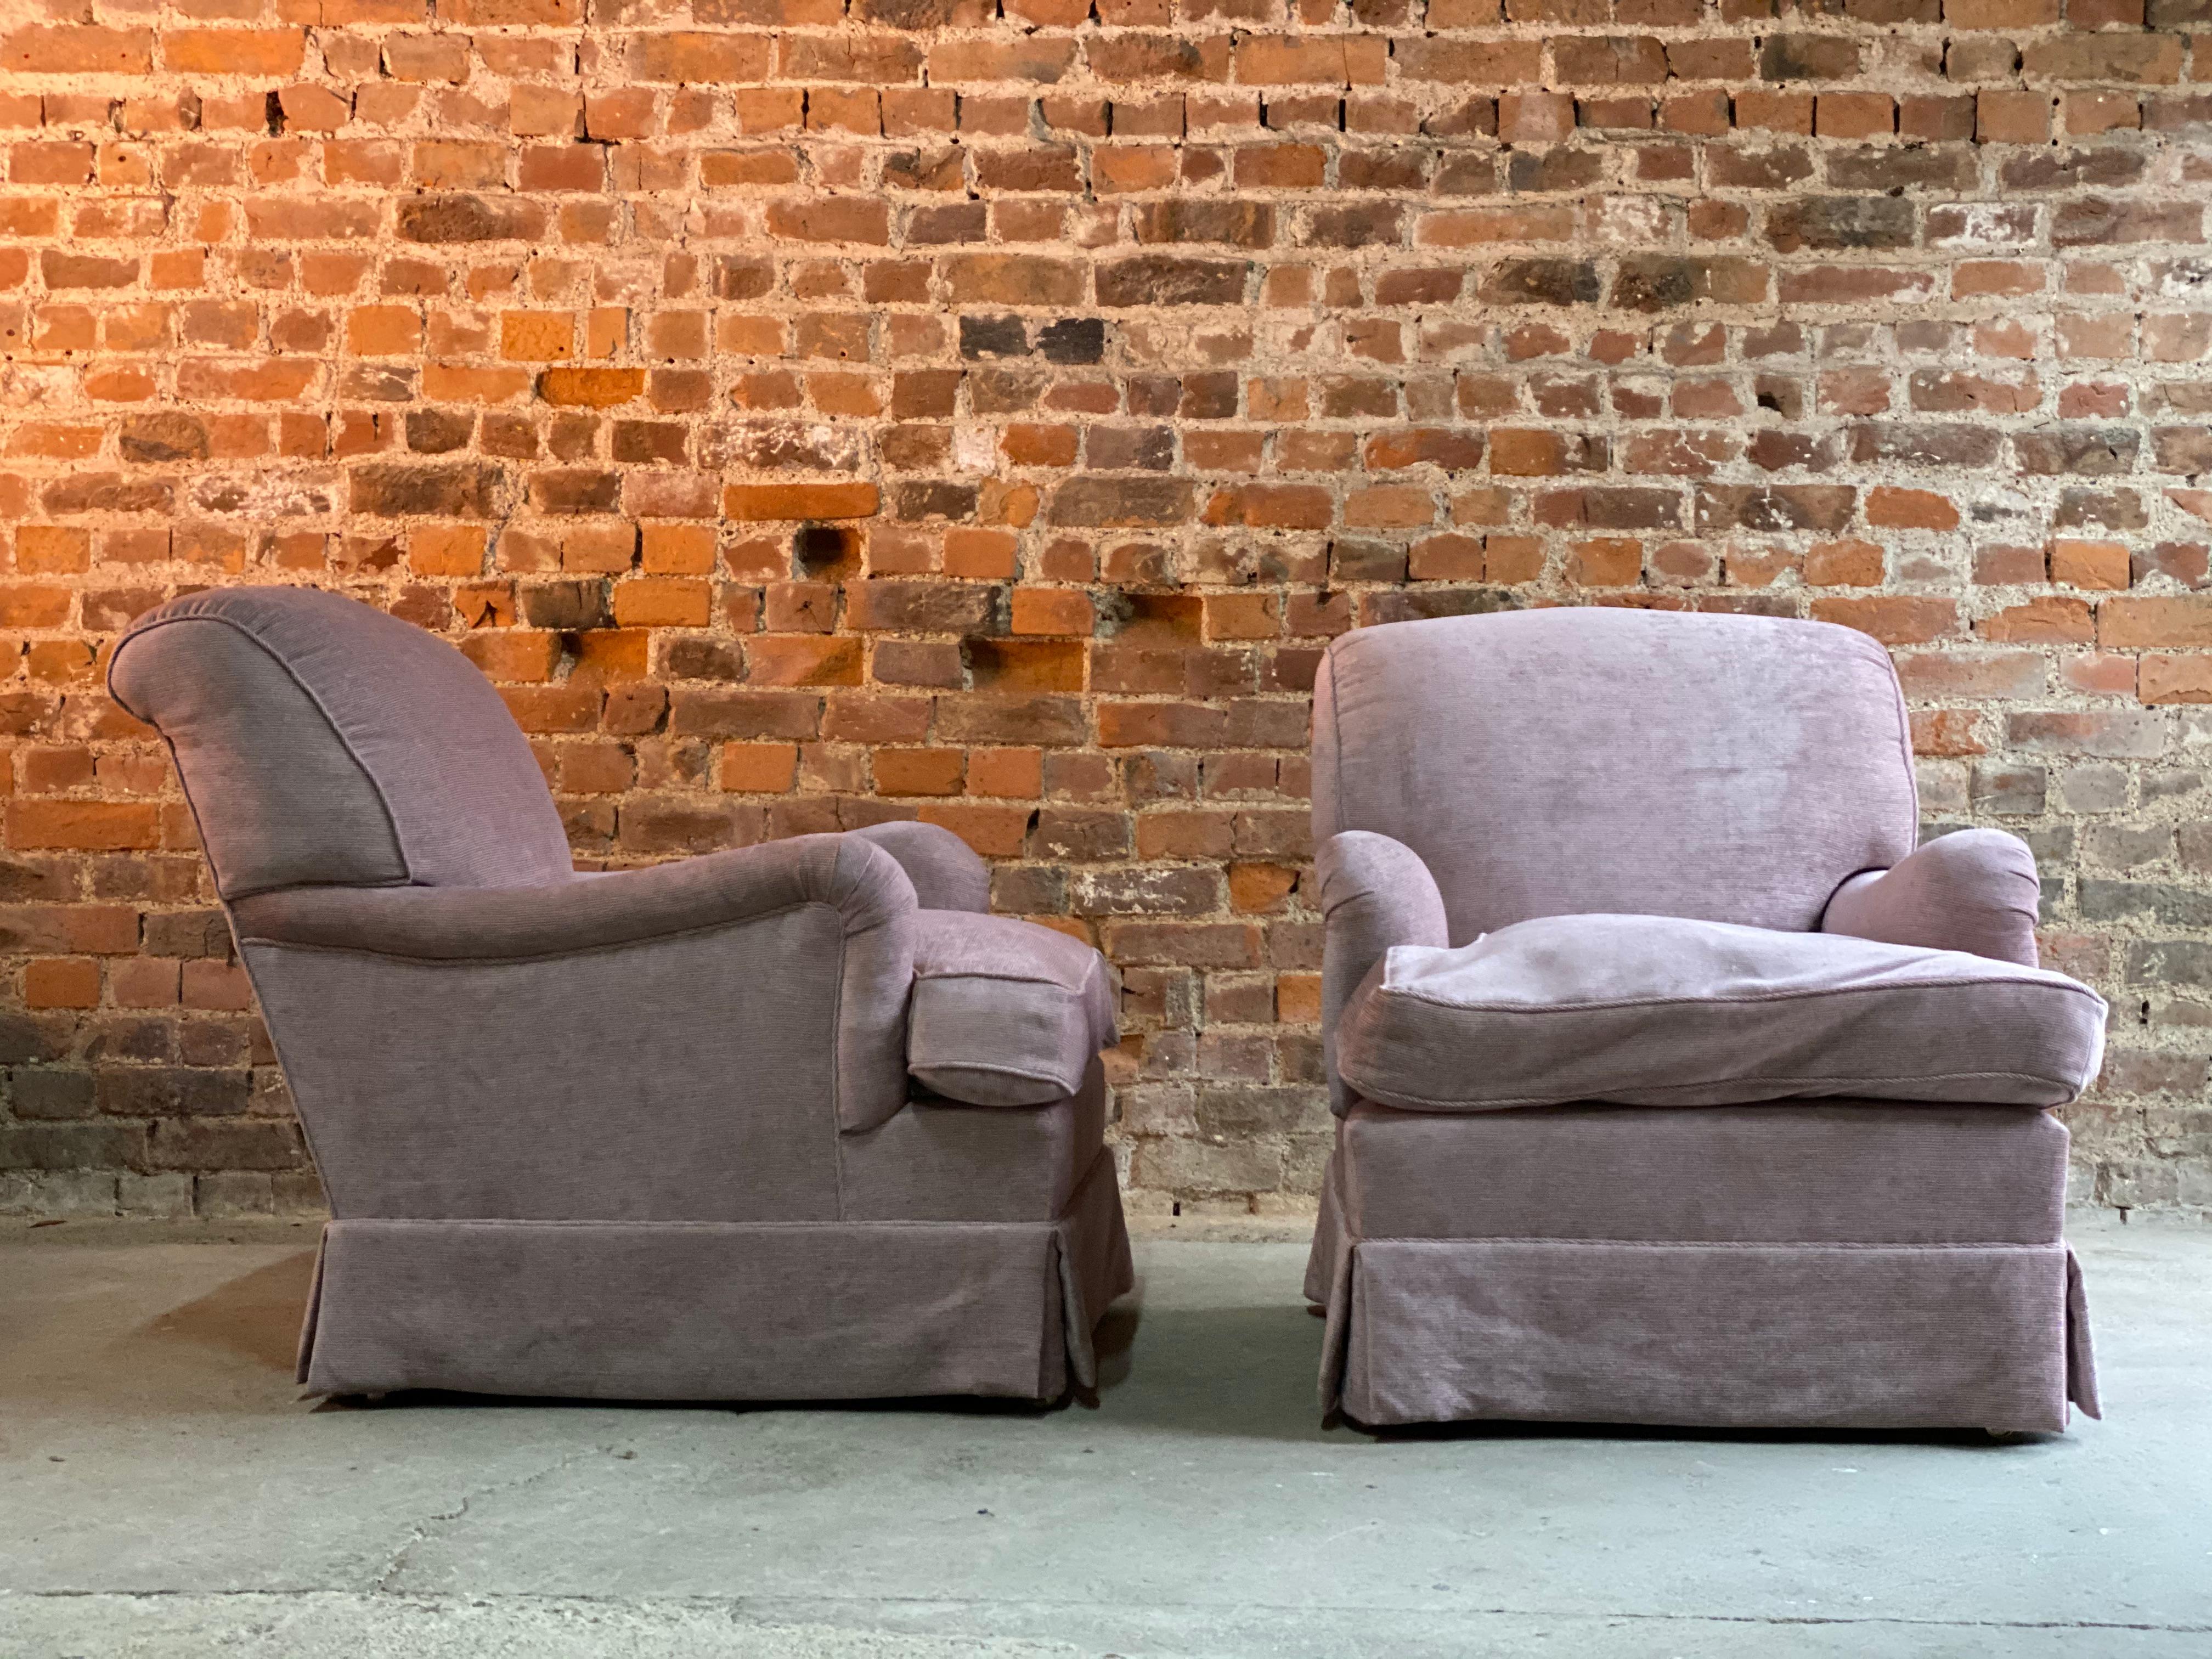 Howard & Sons Bridgewater armchairs matching pair deep seated 2014 Number 4

Howard & Sons loose cushion deep seated Bridgewater matching pair of armchairs labelled to underside, the armchairs upholstered in dusty pink velour upholstery, H&S